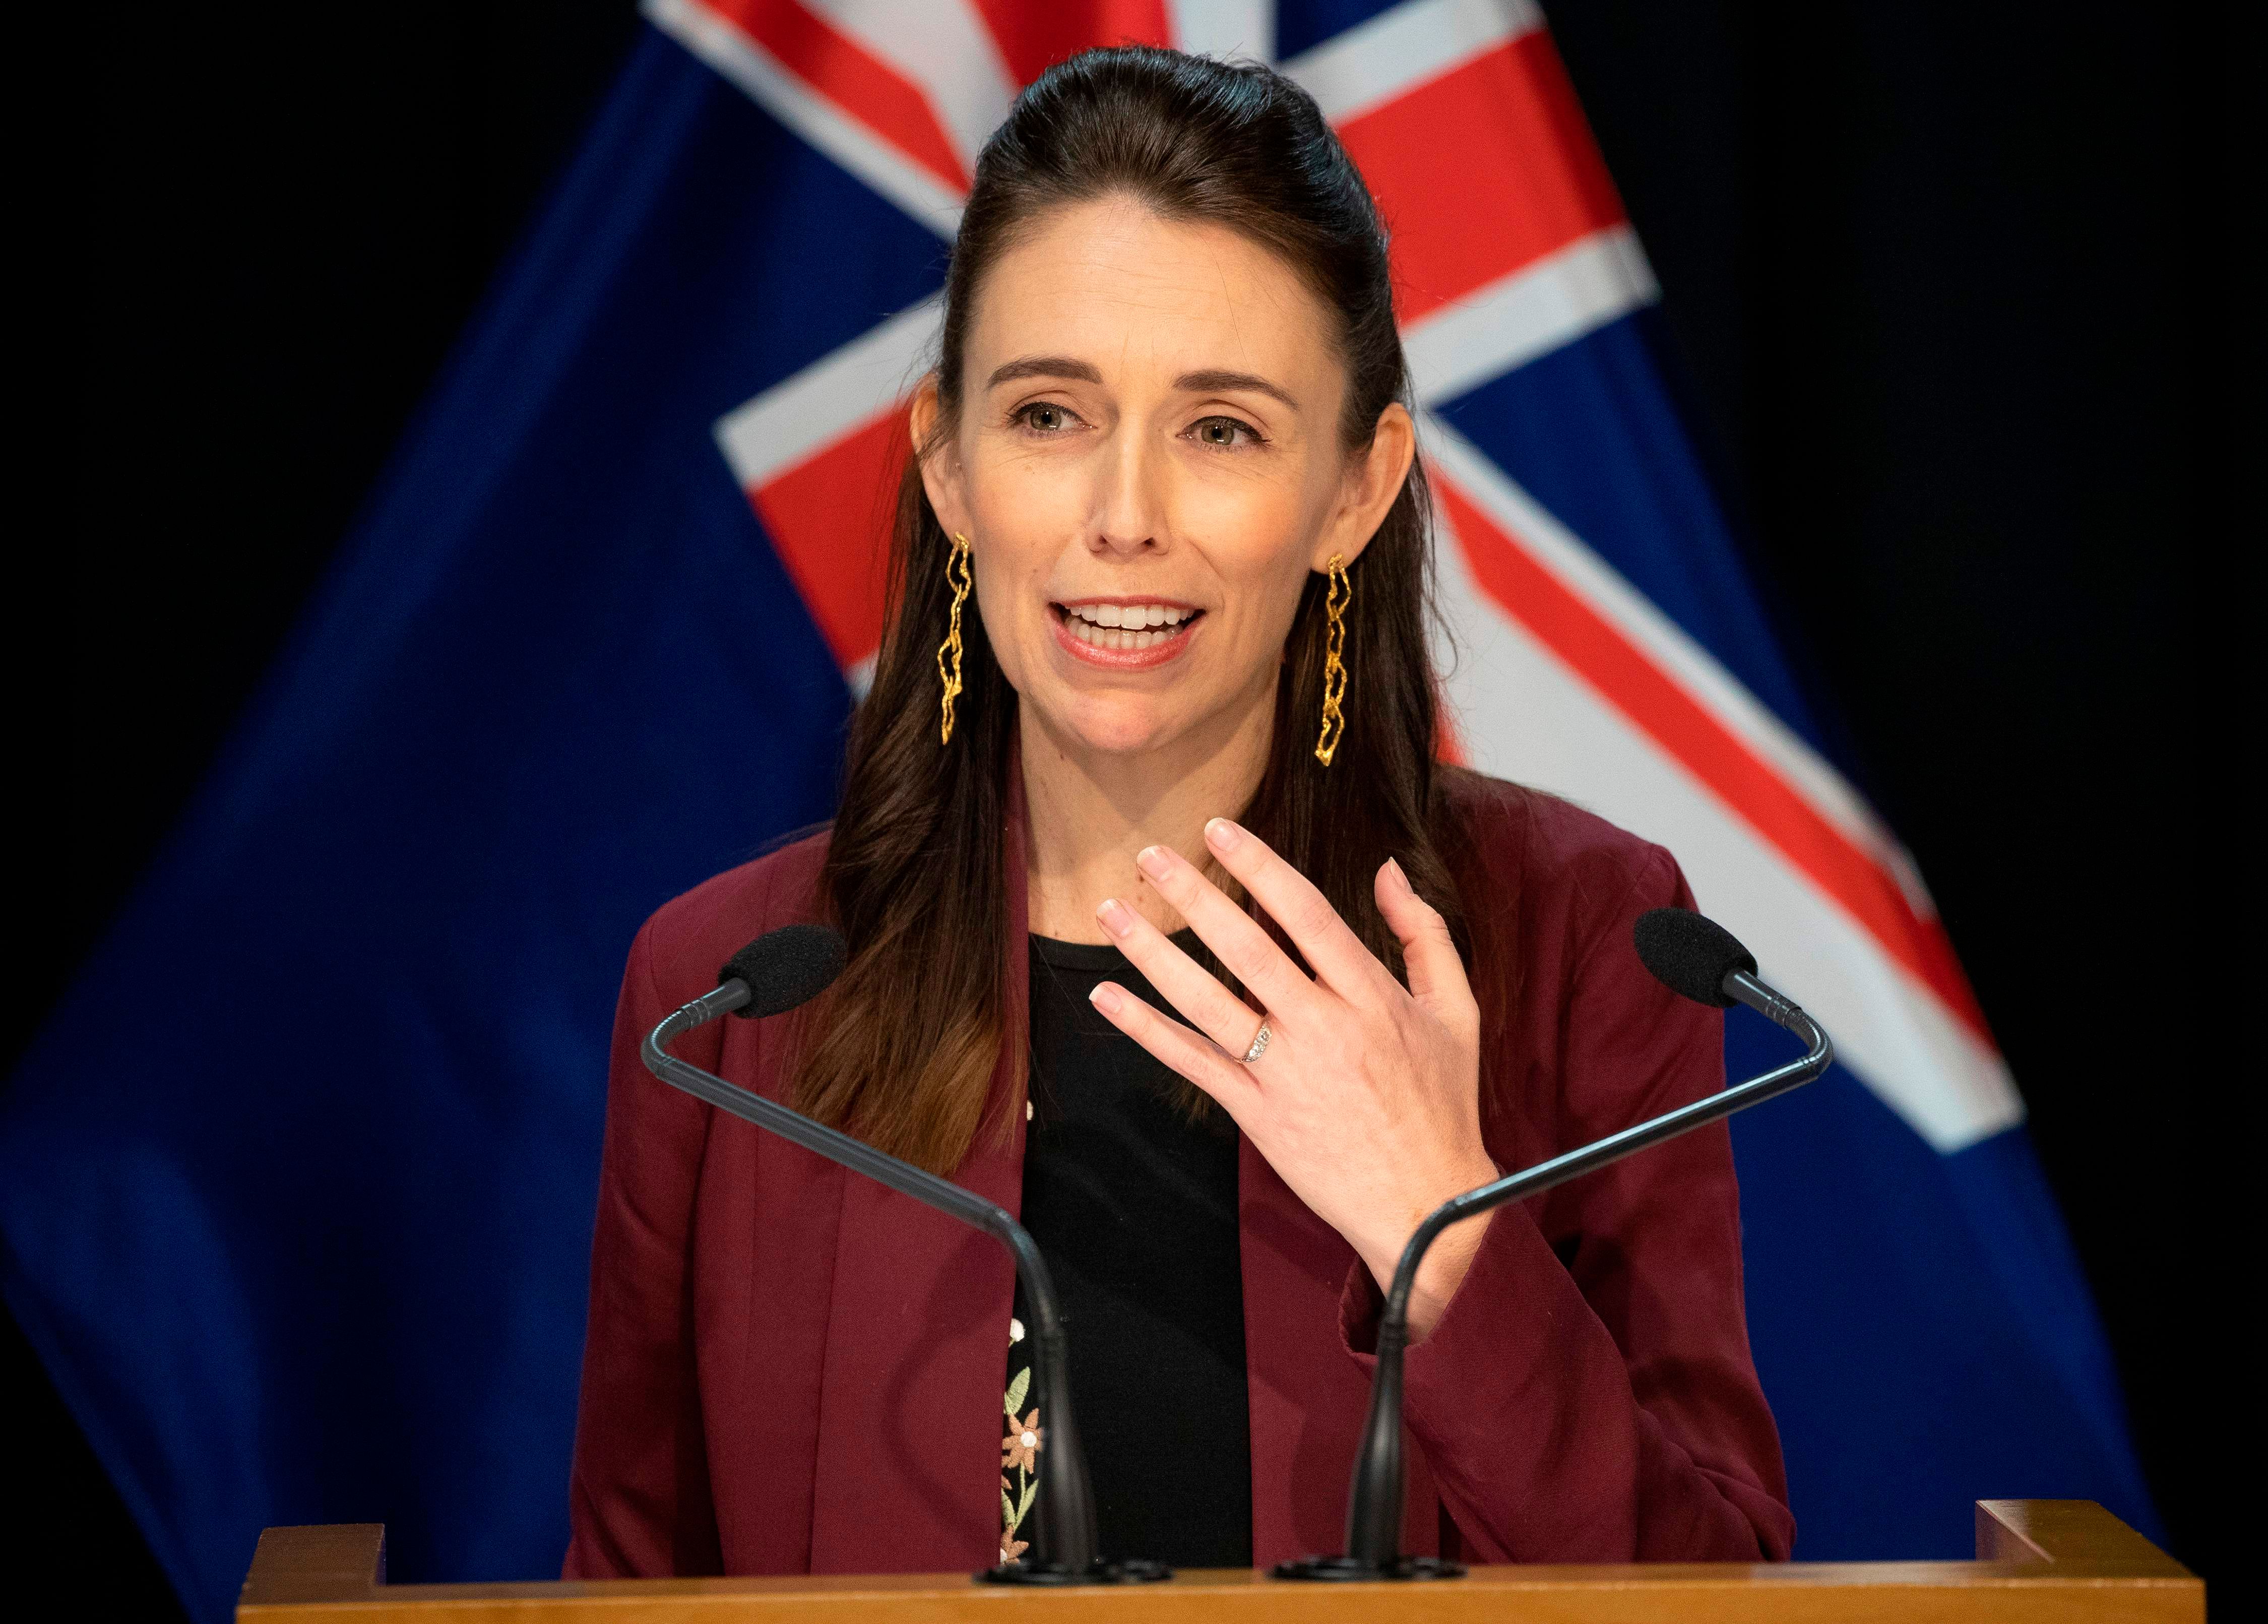 New Zealand's Prime Minister Jacinda Ardern briefs the media about the COVID-19 coronavirus at the Parliament House in Wellington. (AFP Photo)